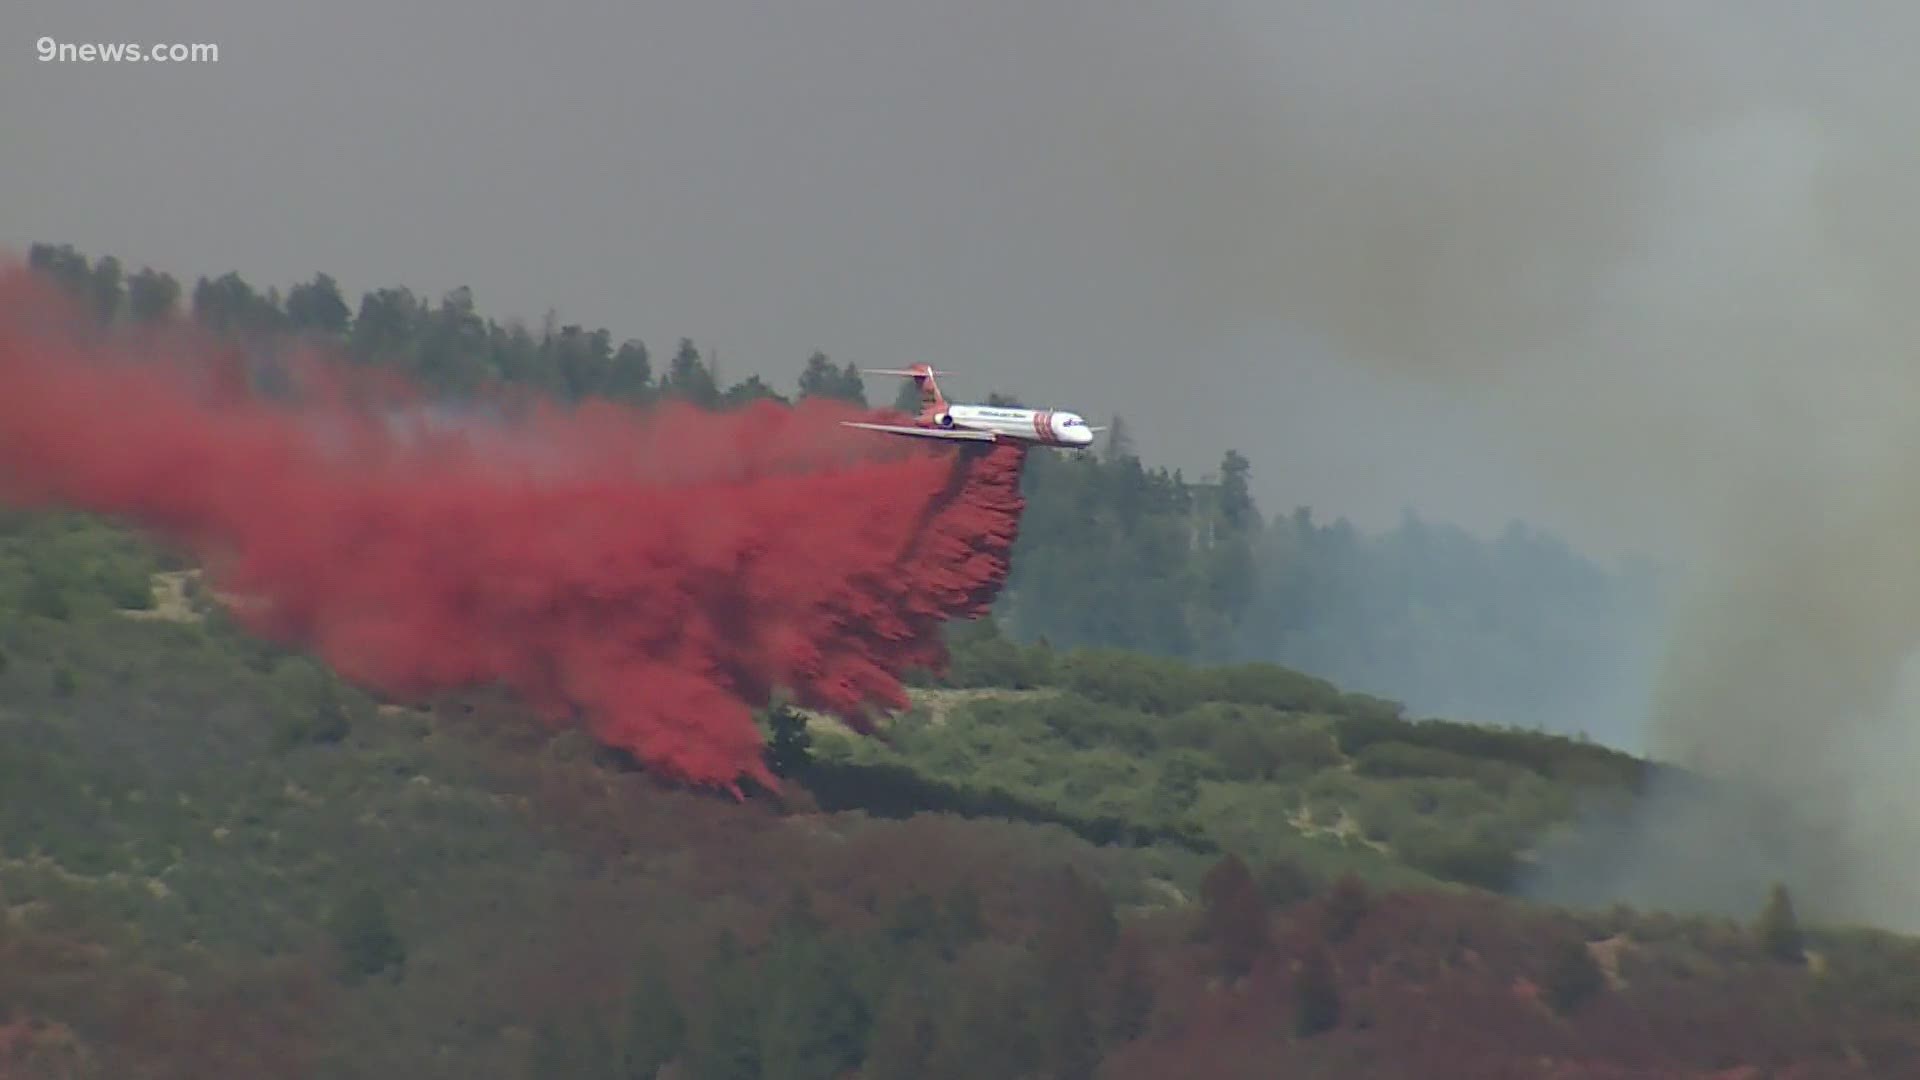 The Grizzly Creek Fire has burned more than 3,200 acres as of Tuesday night and there is no containment.